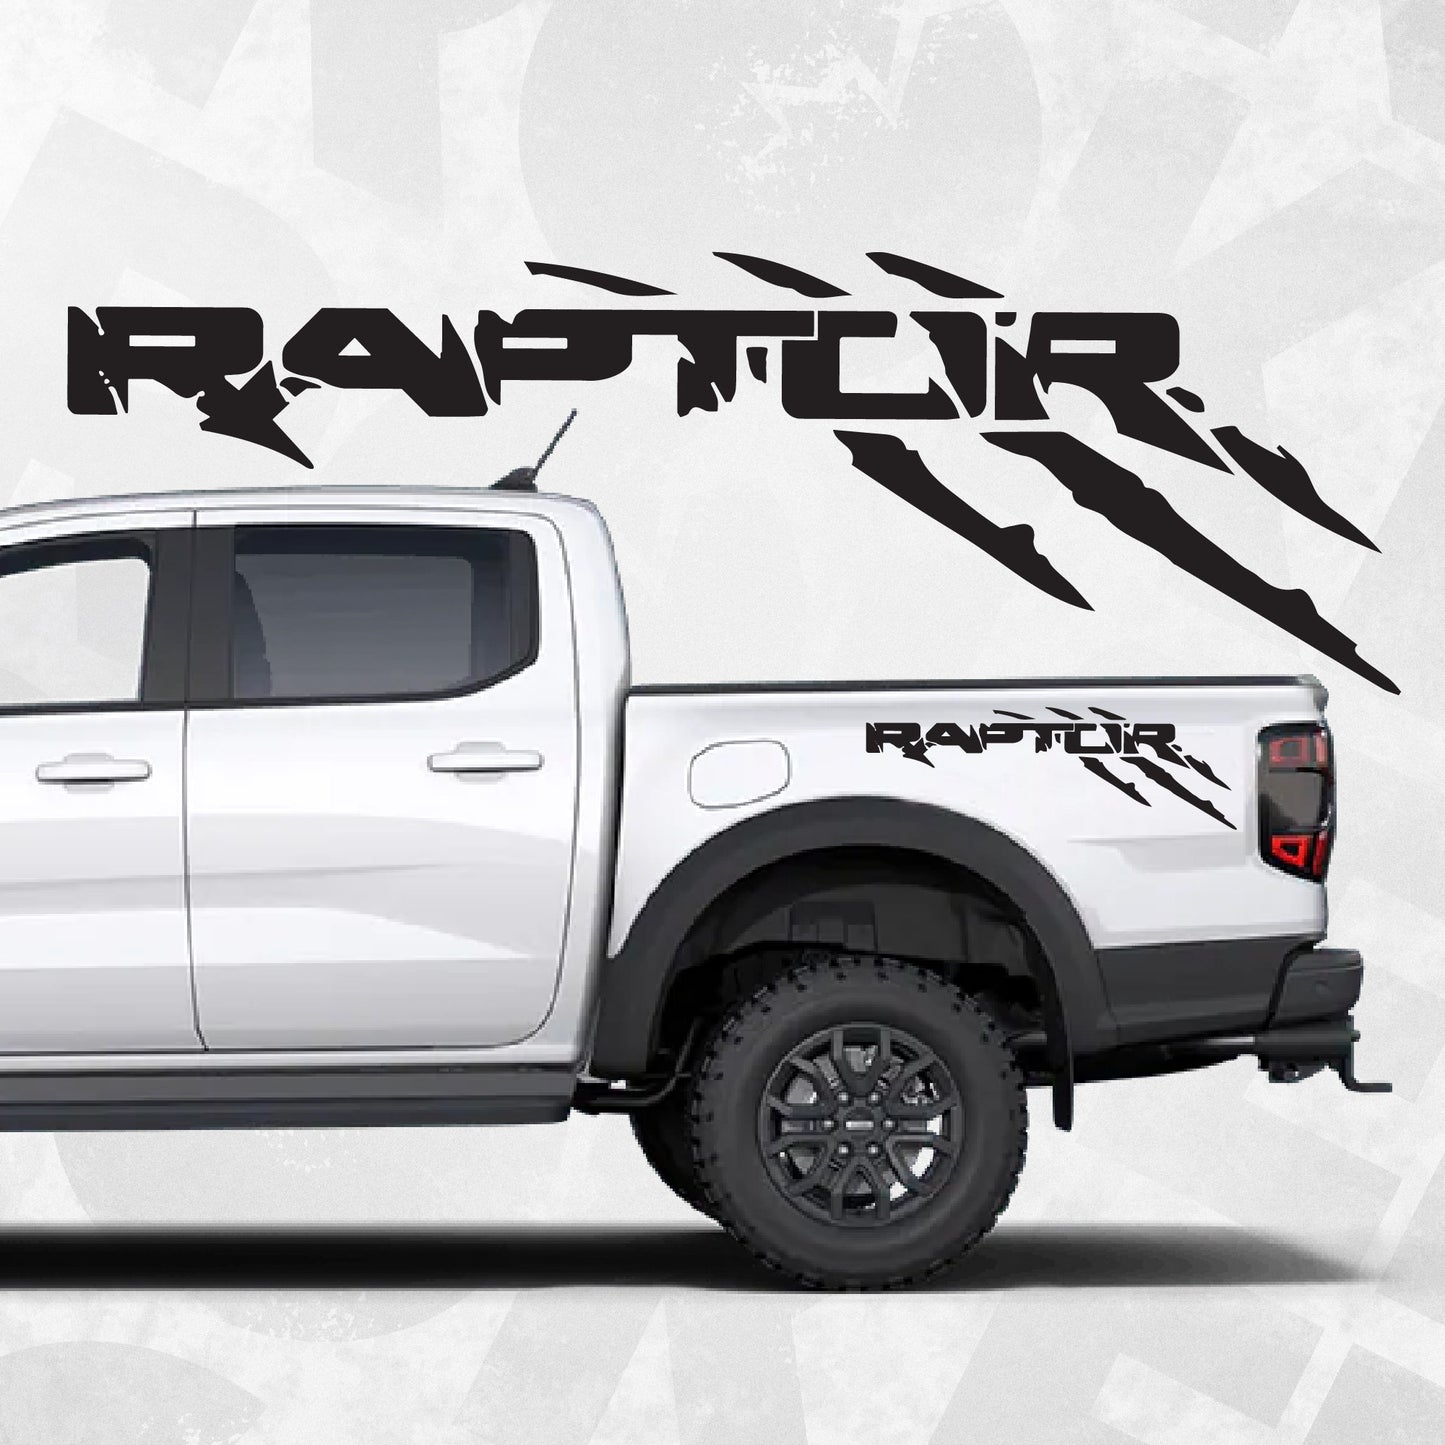 Ford f150 Raptor decals, Bedside truck claw rustic decal, set of 2